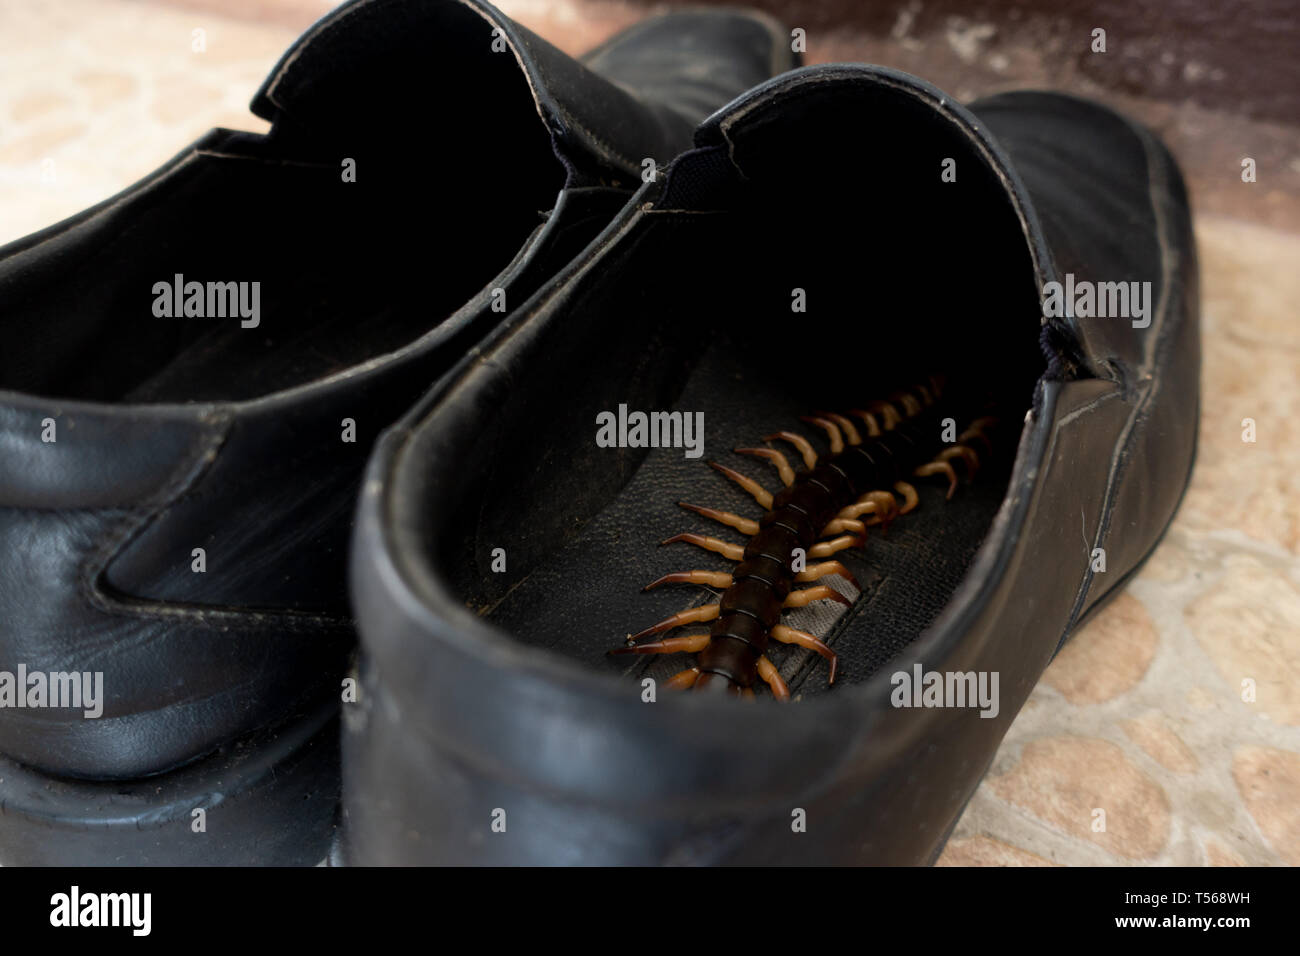 giant centipedes hiding in black ,leather shoes Stock Photo